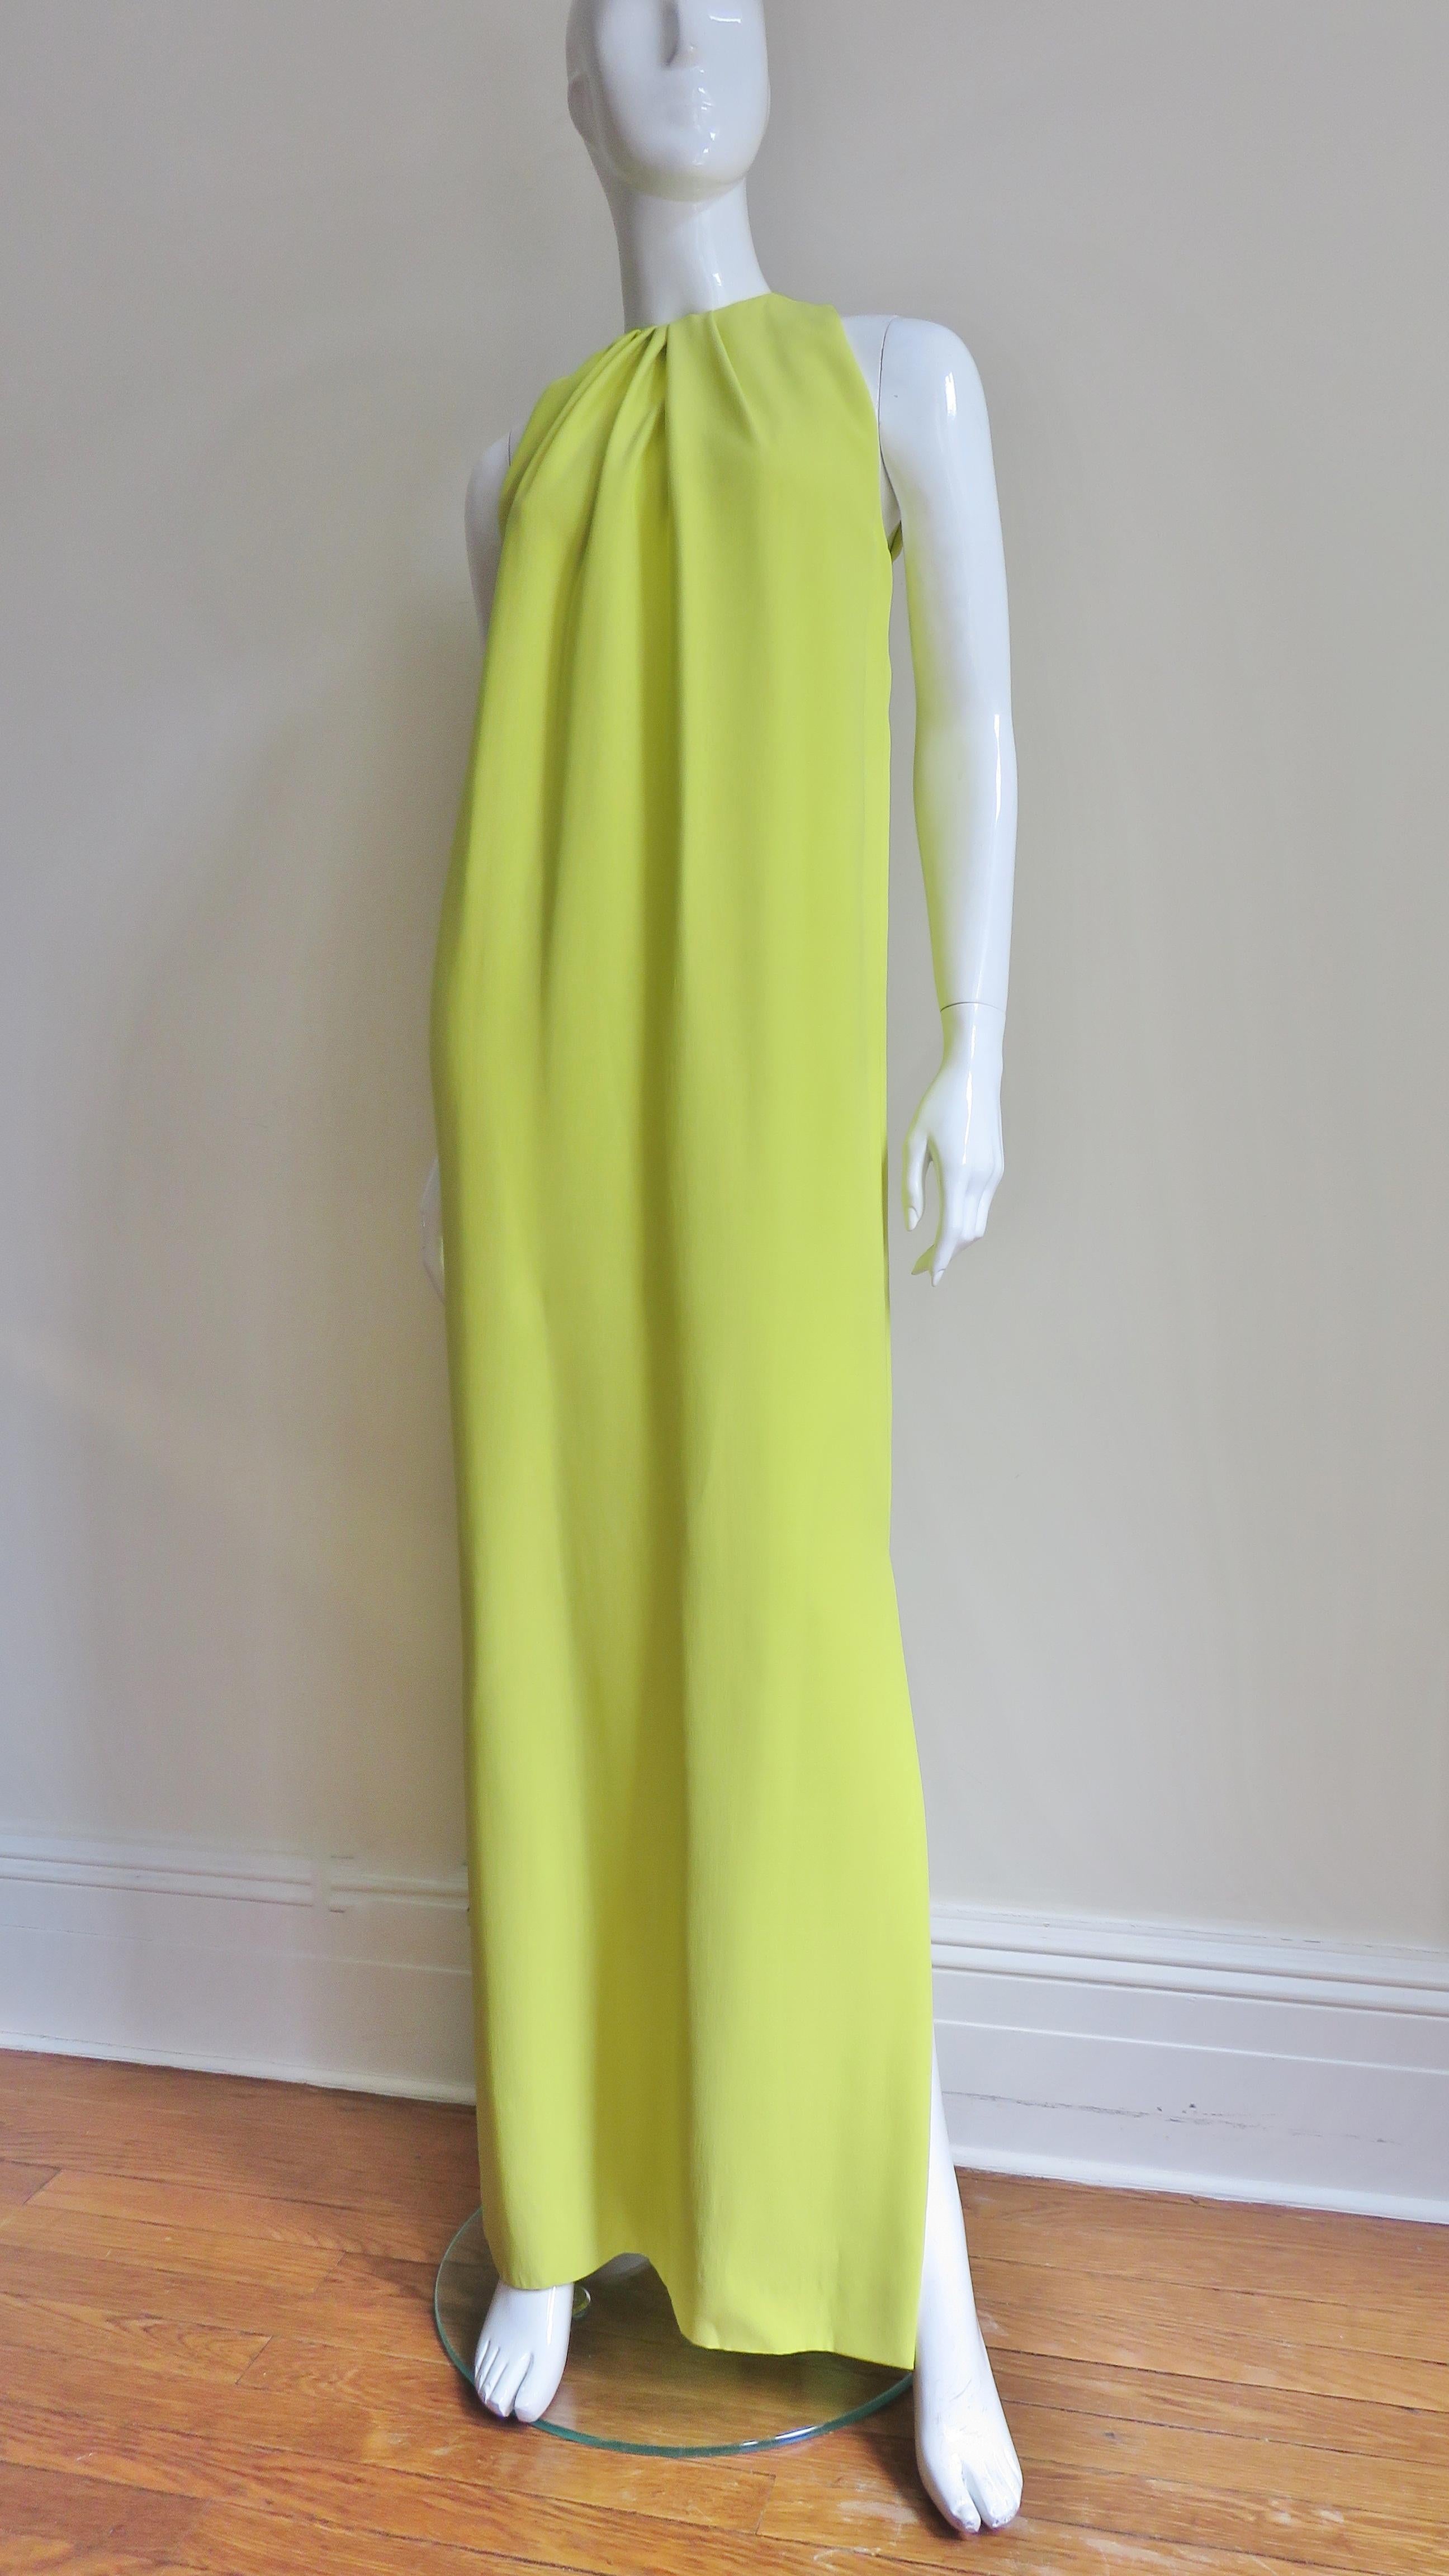 A beautiful yellow silk gown dress from Christian Dior.  It is sleeveless and has a crew neckline with tucks around it's circumference opening to the hem which has a side slit- chic and elegant. It is lined in matching silk and has a matching